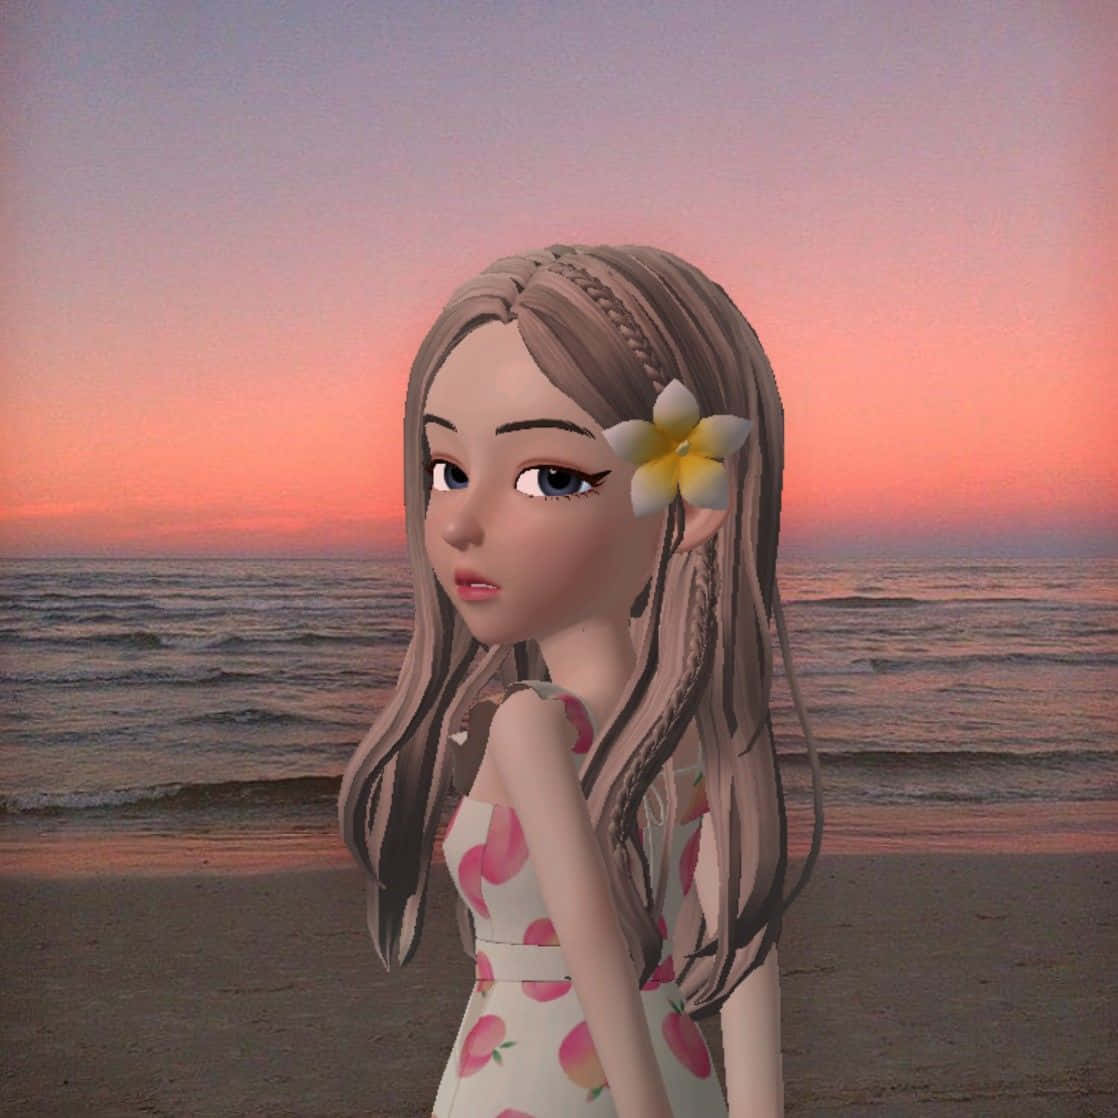 Exciting Adventures in the Zepeto World